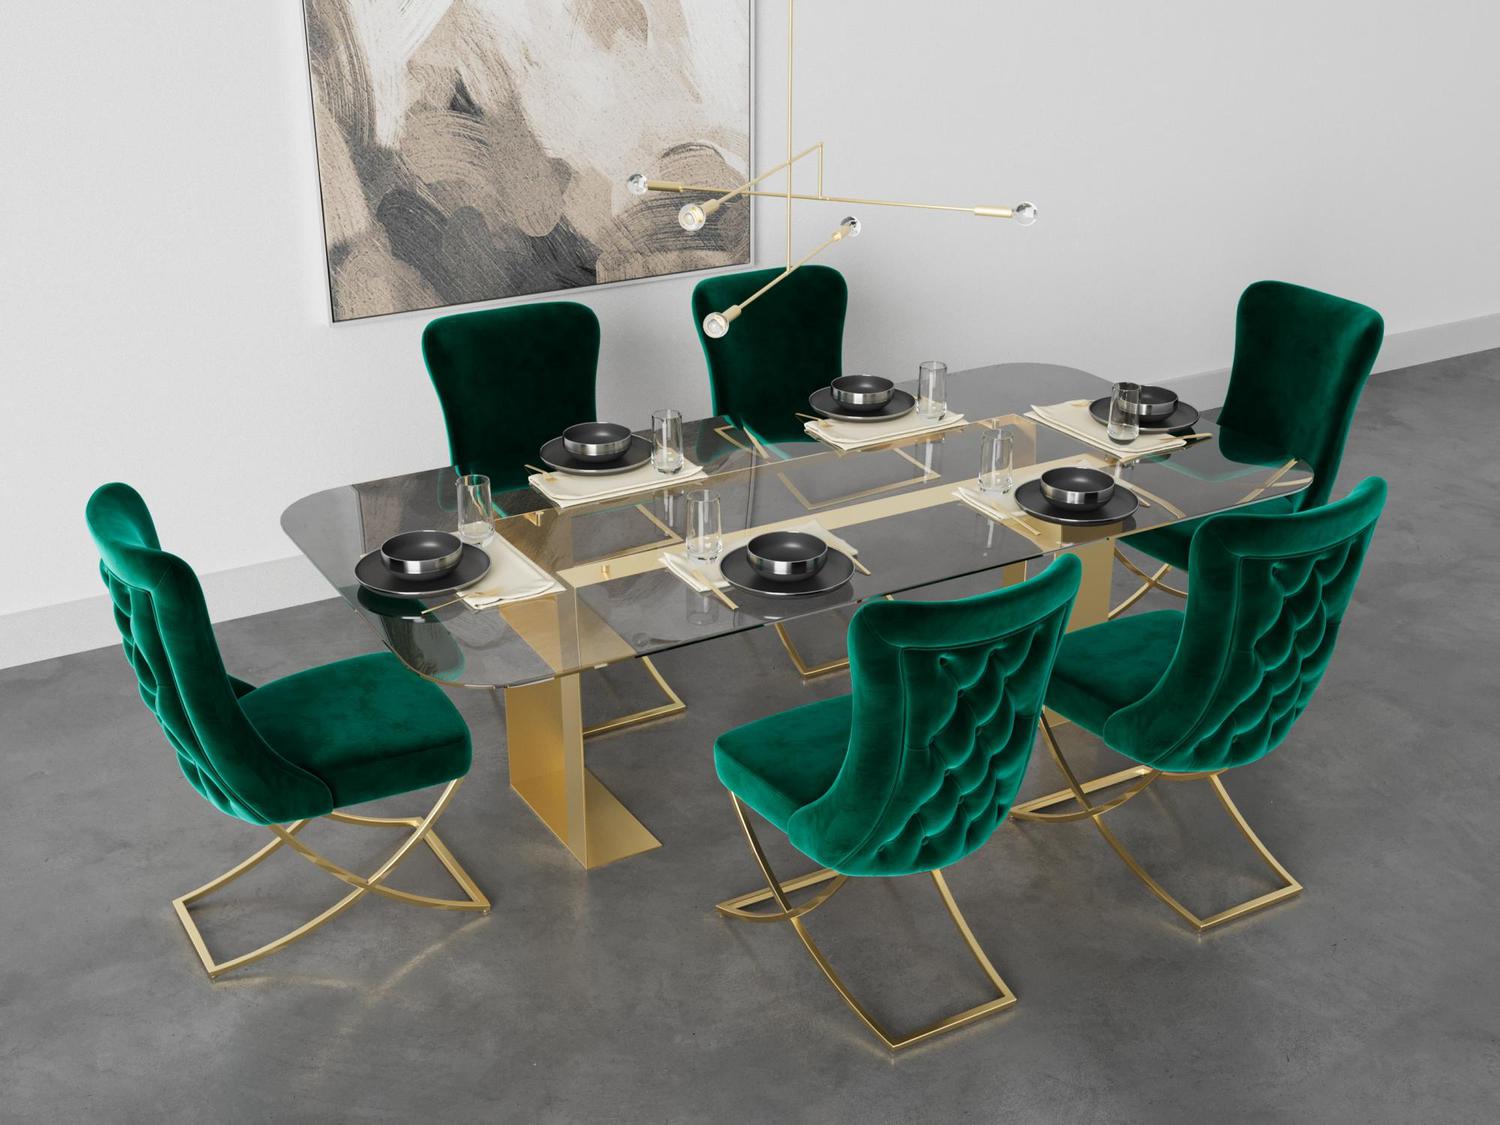 Sultan Collection Wing Back, Modern design, upholstered dining chair in Emerald Green with Gold Metal legs in a dining room for a large gathering setup.